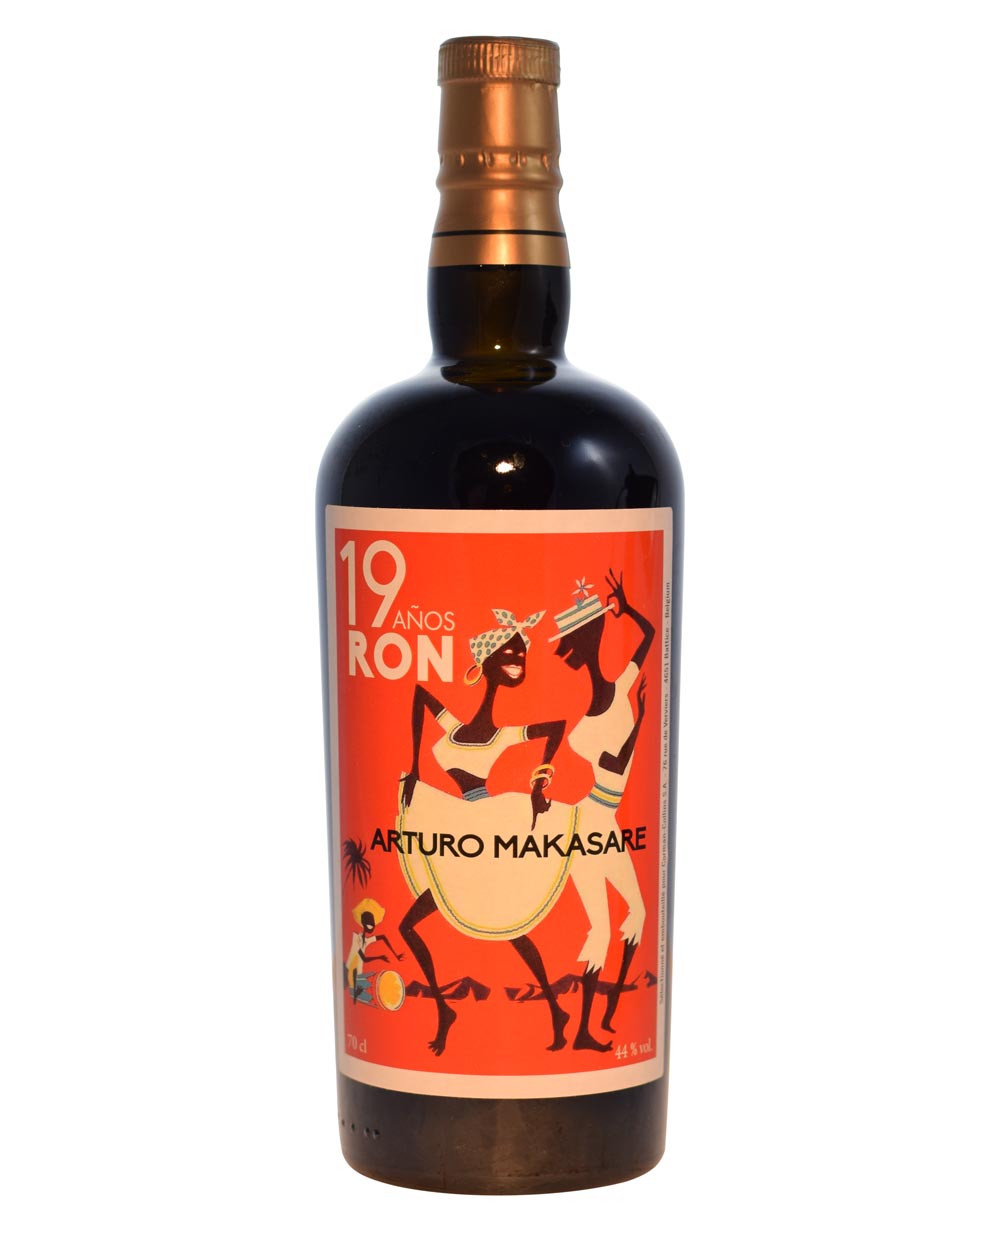 Rum Arturo Makasare - Limited Edition (19 Años) Musthave Malts MHM